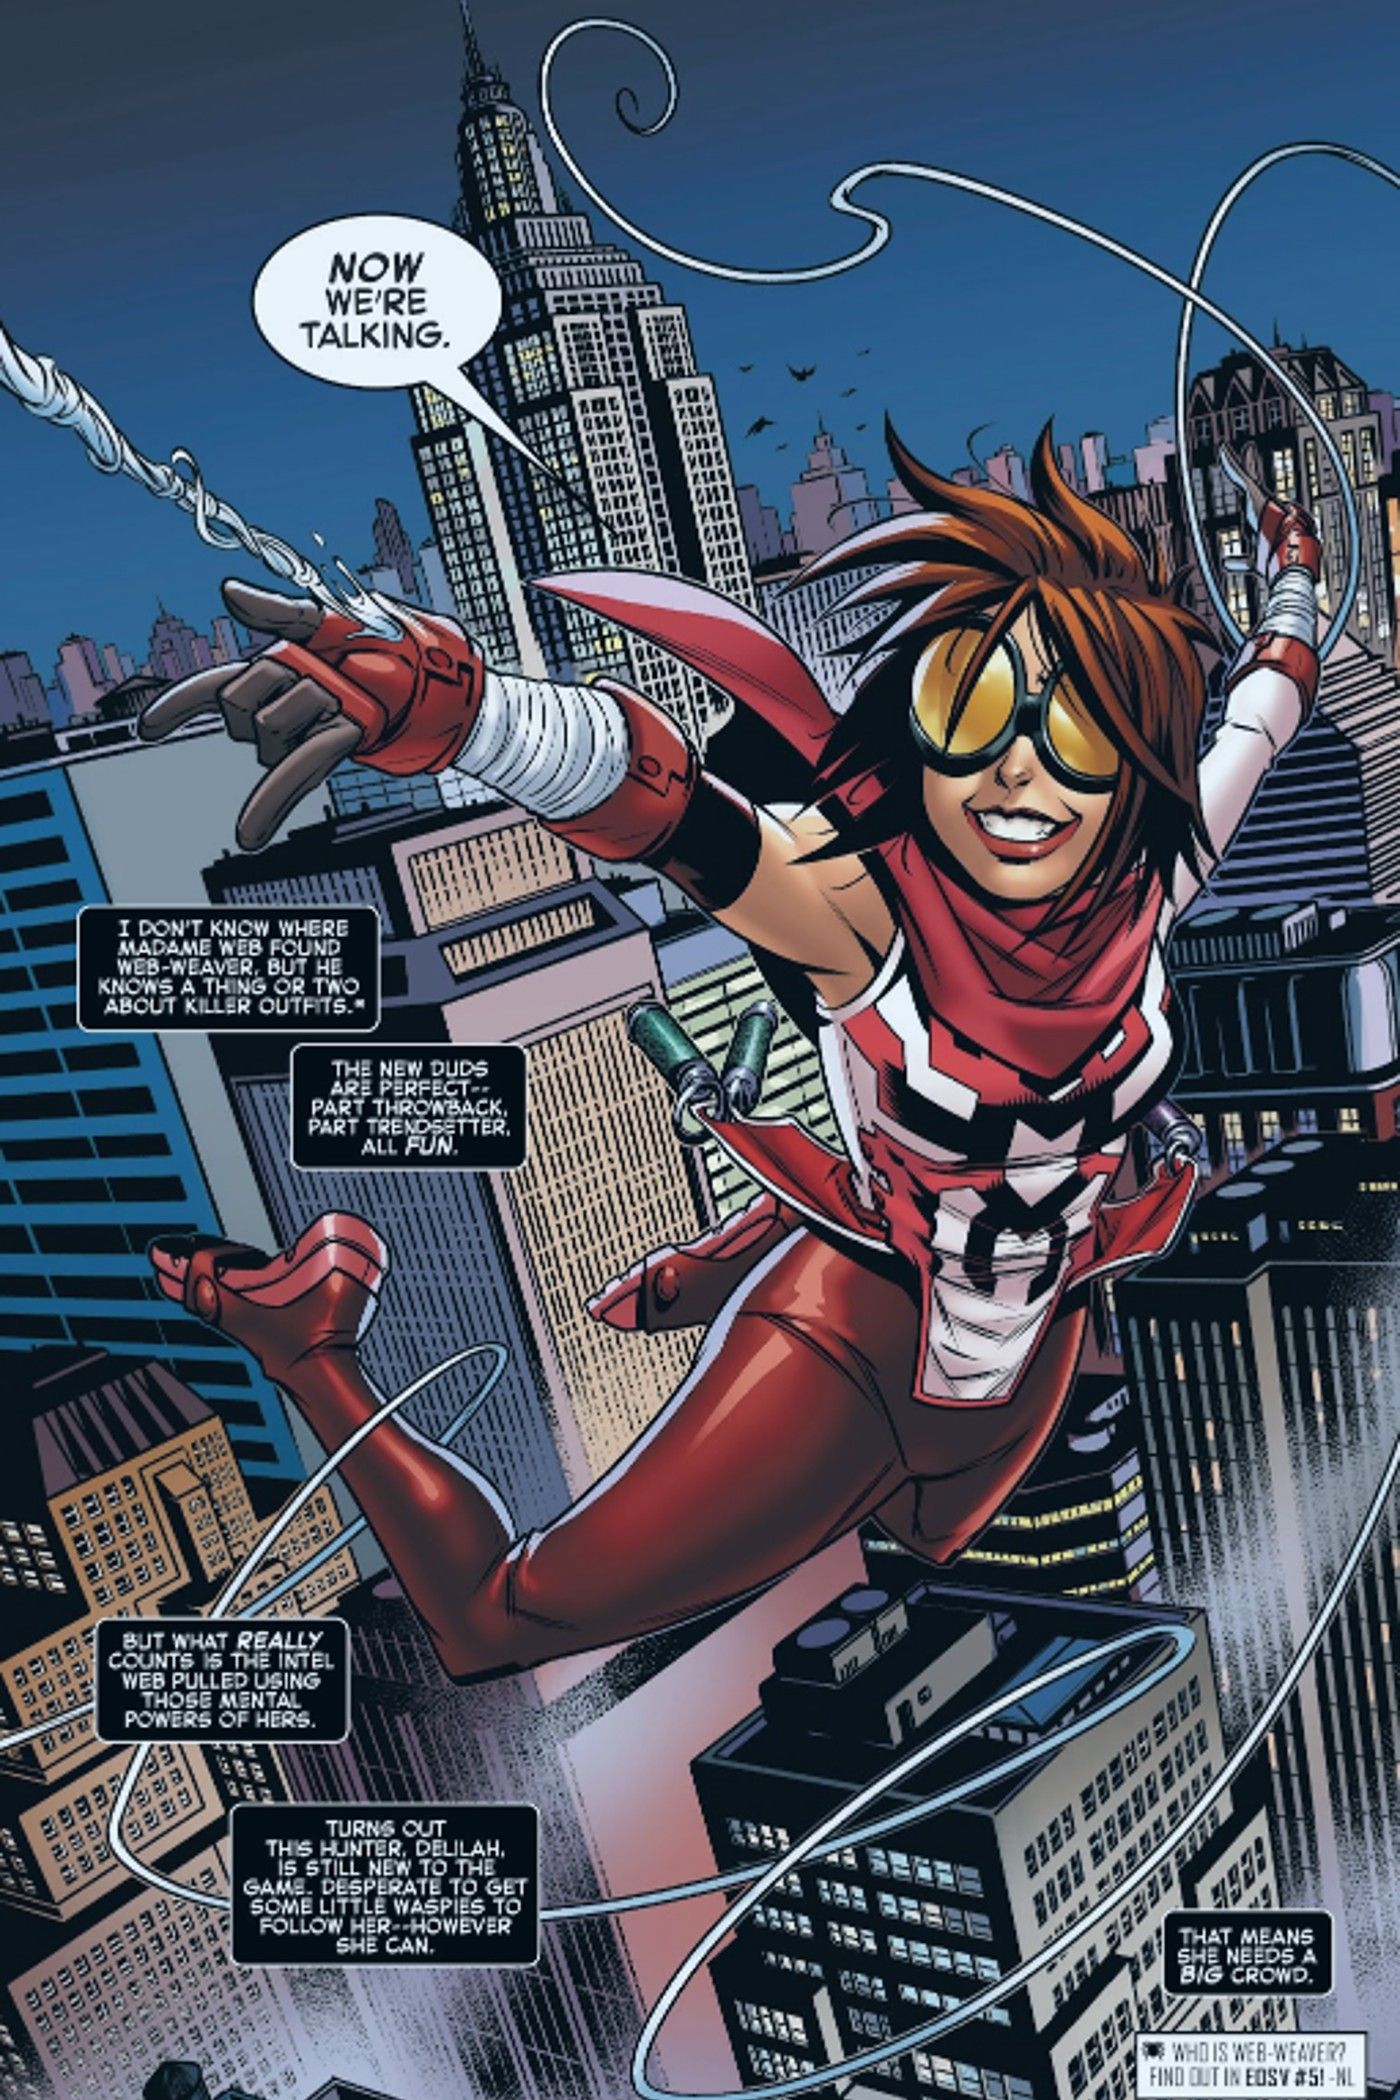 Marvel’s Coolest Spider-Girl Gets A Brand New Costume